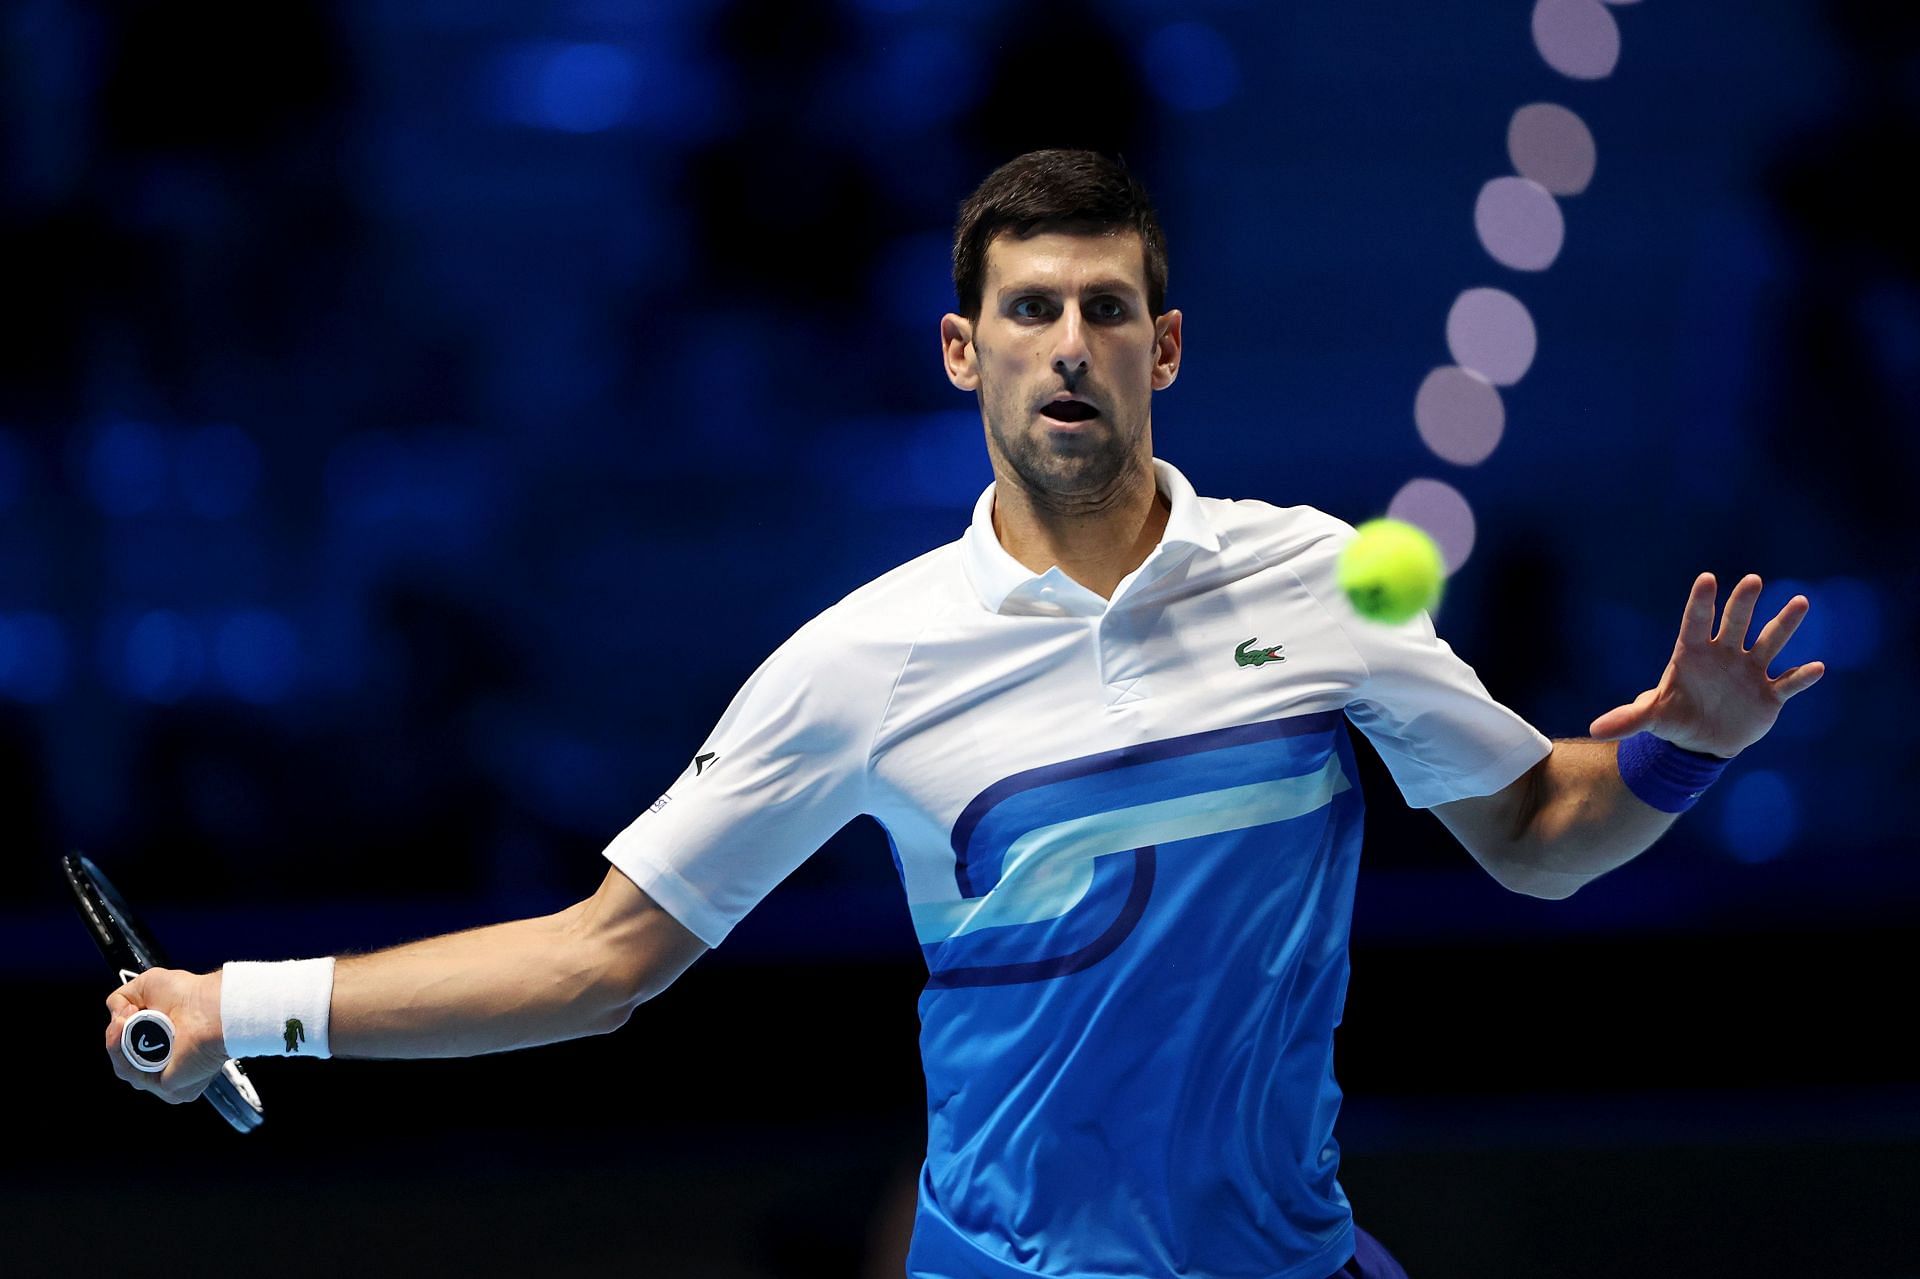 Novak Djokovic during his win over Casper Ruud at the 2021 Nitto ATP Tour Finals